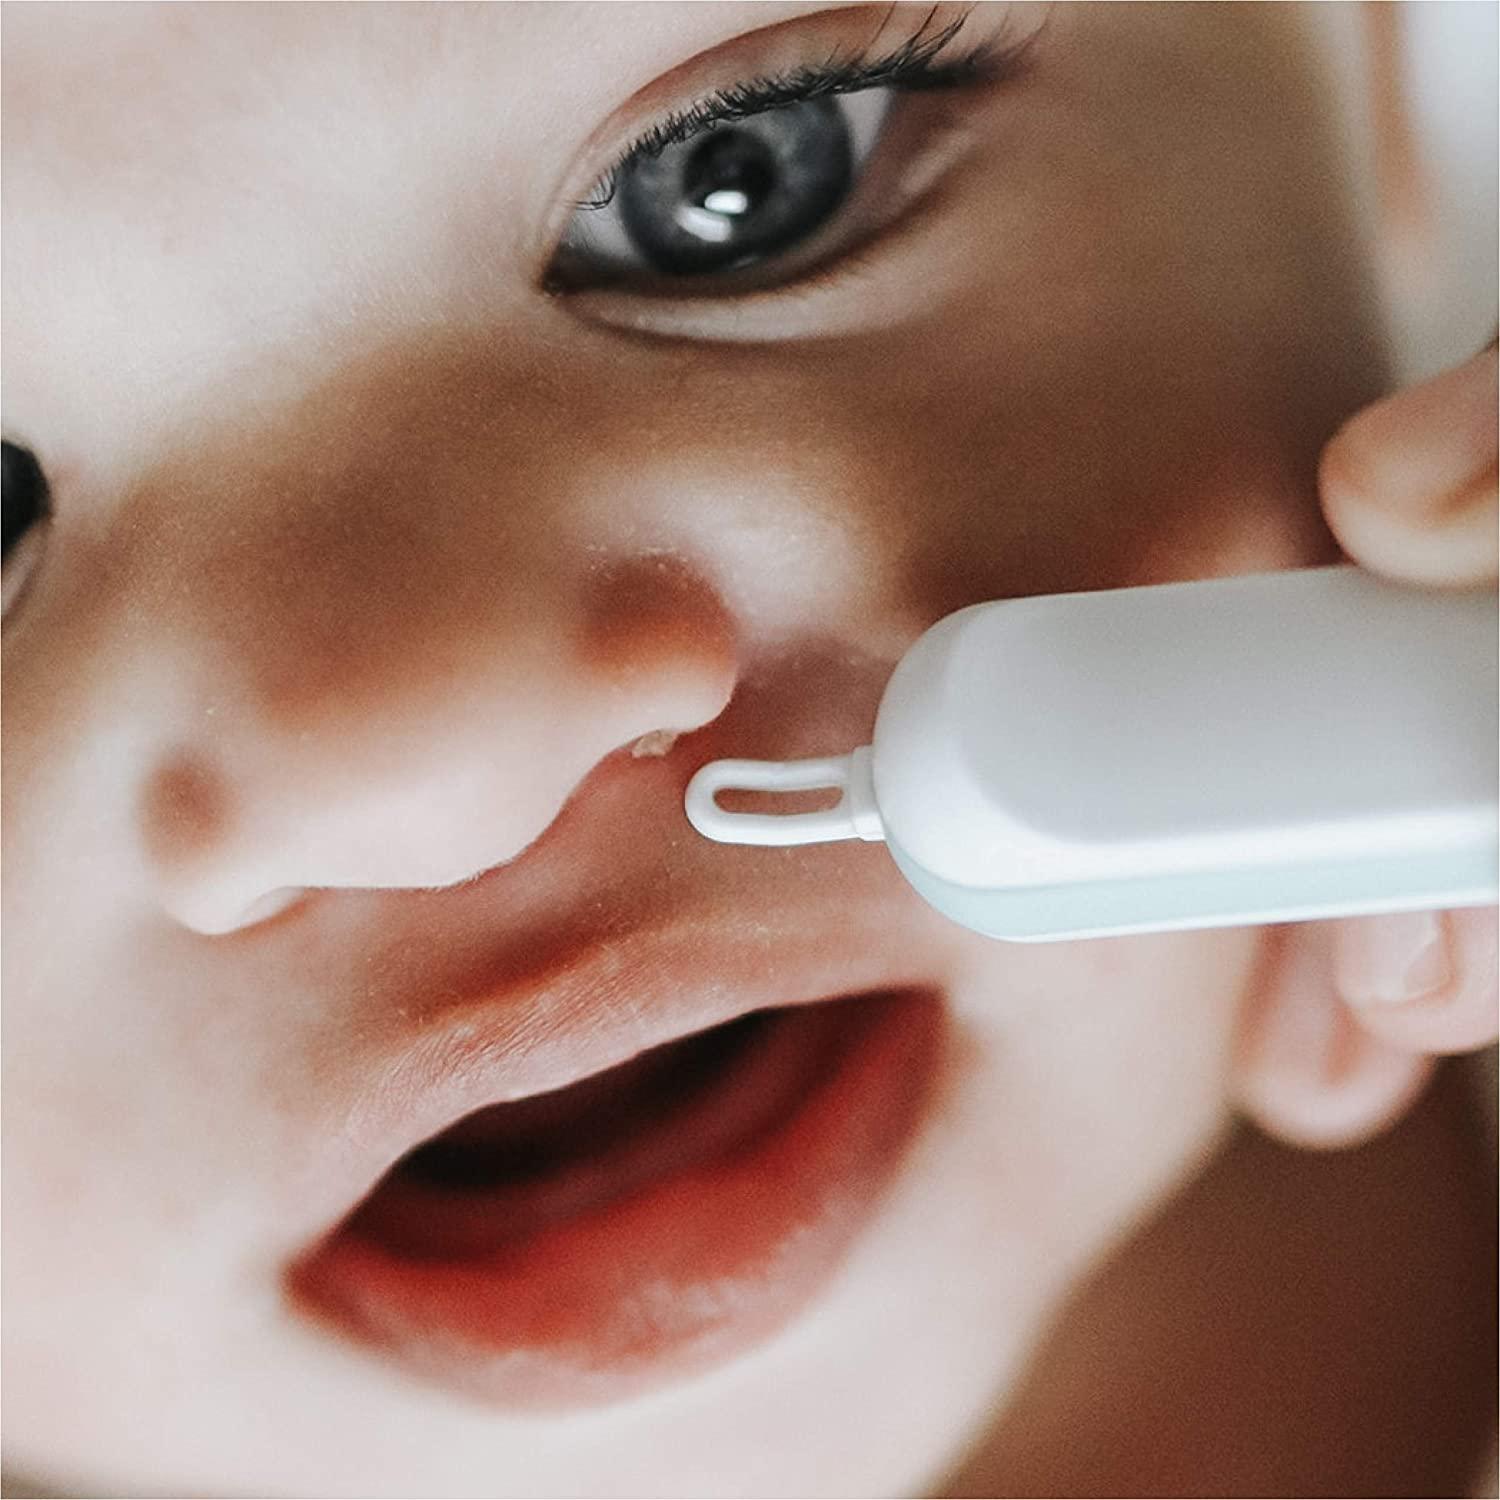 FridaBaby 3-in-1 Nose, Nail + Ear Picker by Frida Baby the Makers of  NoseFrida the SnotSucker, Safely Clean Baby's Boogers, Ear Wax & More  3-in-1 Picker